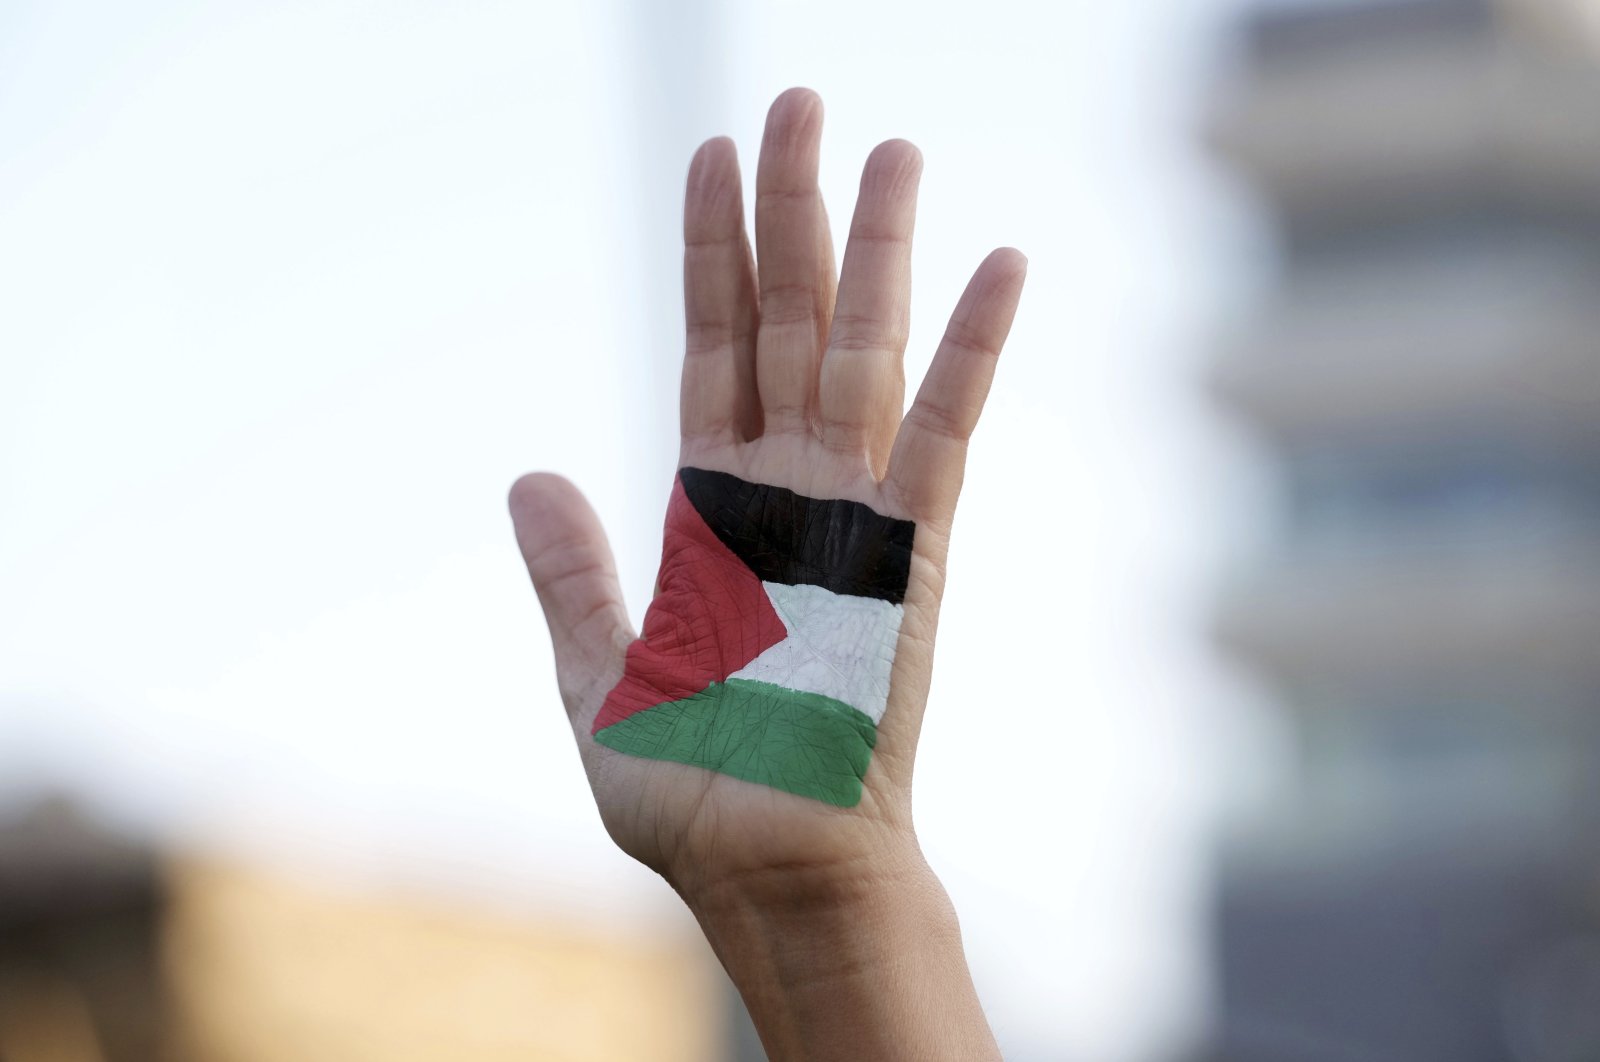 A protester wears a representation of the Palestinian flag at a weekly demonstration in solidarity with residents of the Sheikh Jarrah neighborhood in east Jerusalem, where Palestinian families are under imminent threat of forced displacement from their homes by Israeli settlers, Jan. 7, 2022. (AP Photo)